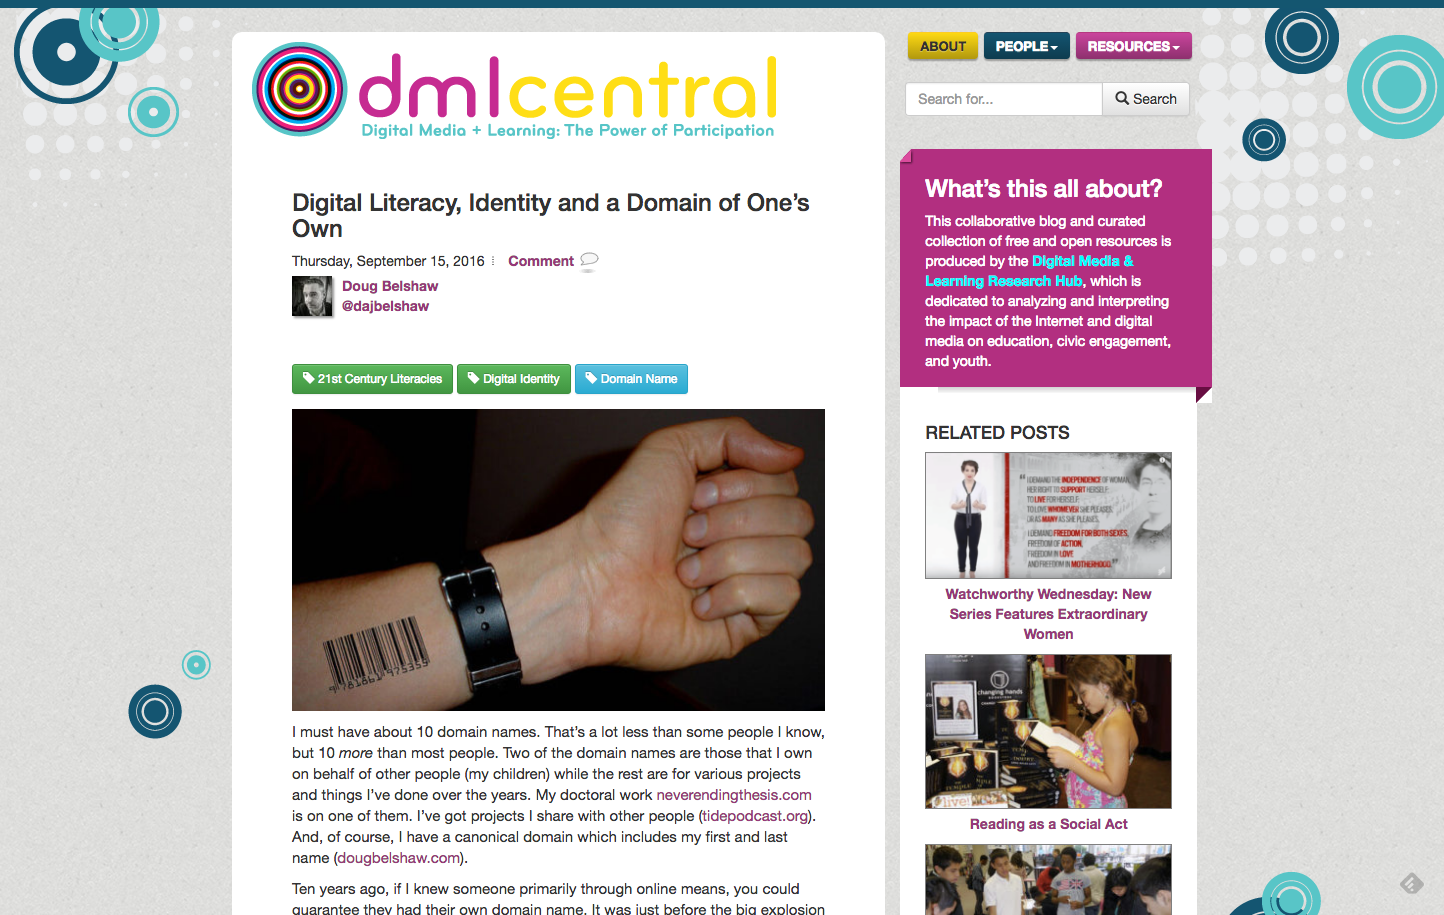 Digital Literacy, Identity and a Domain of One’s Own